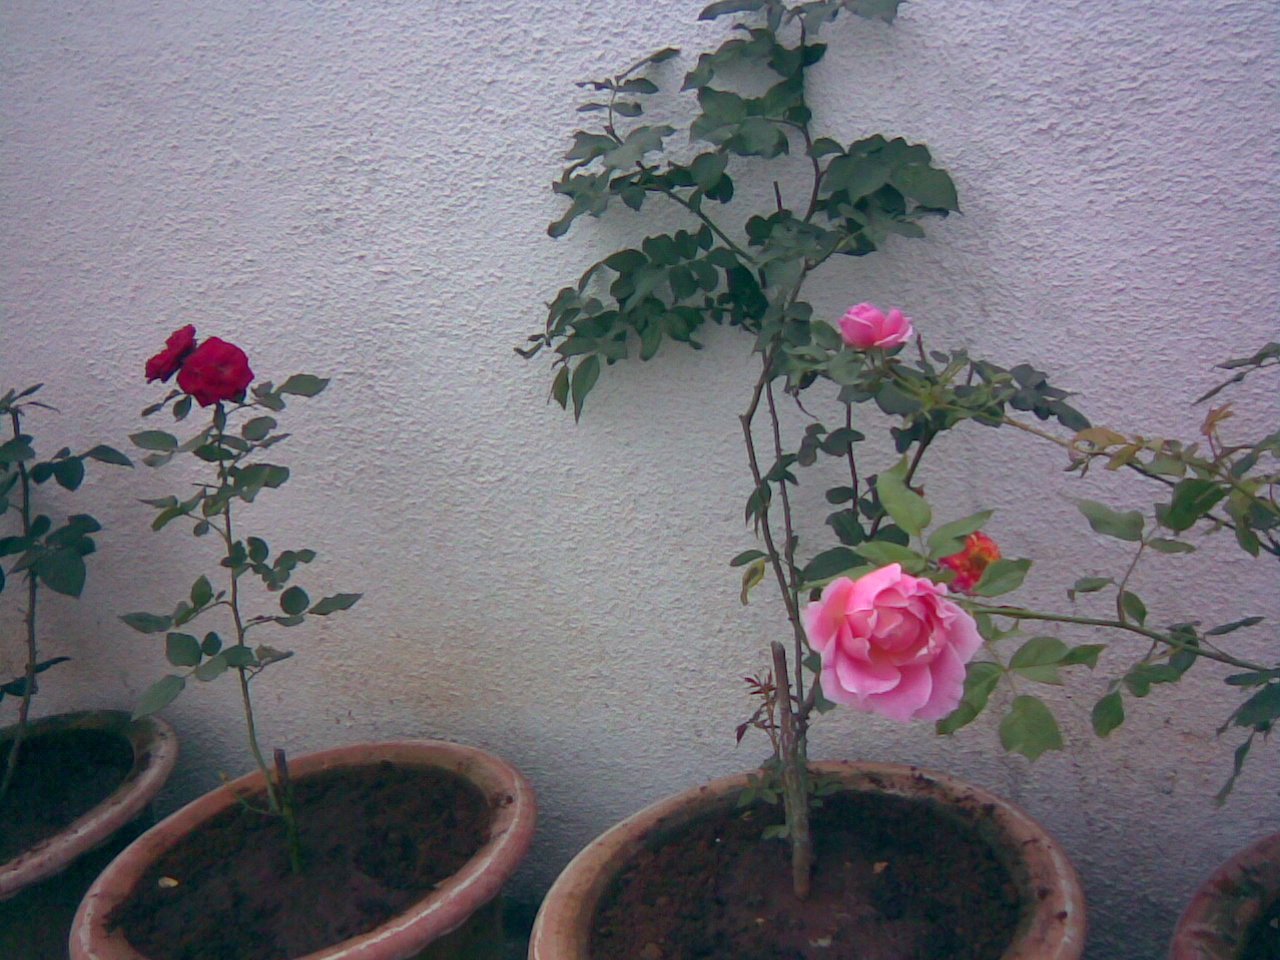 http://2.bp.blogspot.com/-EvEBnMKoxwI/TcUlUen07II/AAAAAAAABHY/XwGbY2Ytrk0/s1600/pink+red+roses+plant+in+my+garden+ree+pictures+of+roses%252C+rose+clipart+and+wallpaper.+Free+rose+greeting+cards.jpg